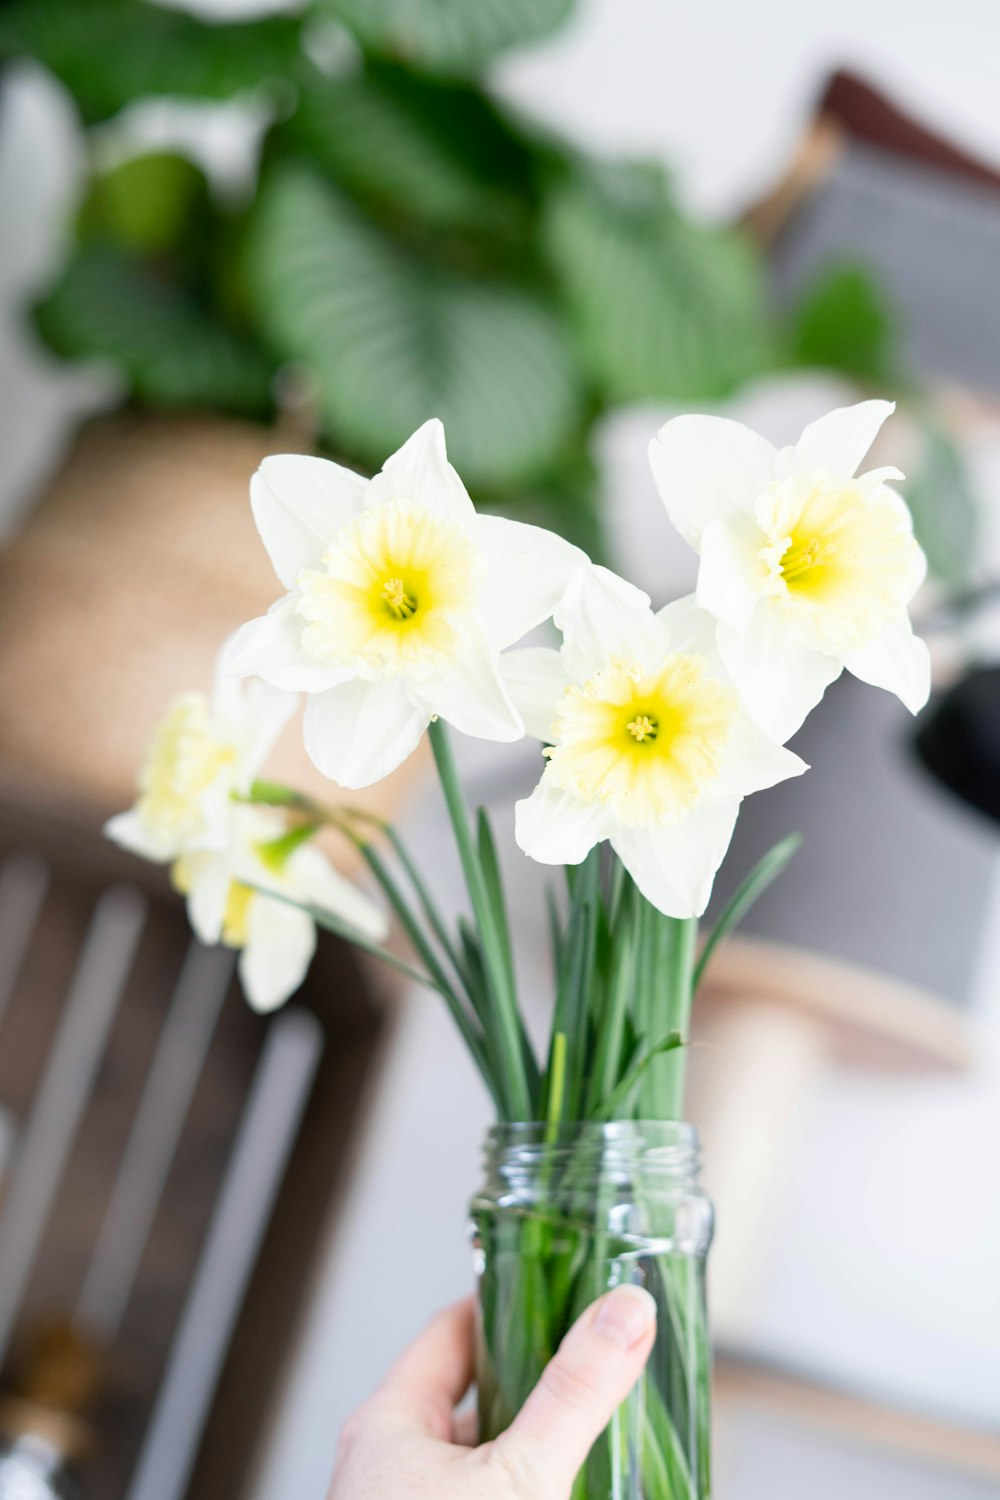 white and yellow daffodils in clear glass vase